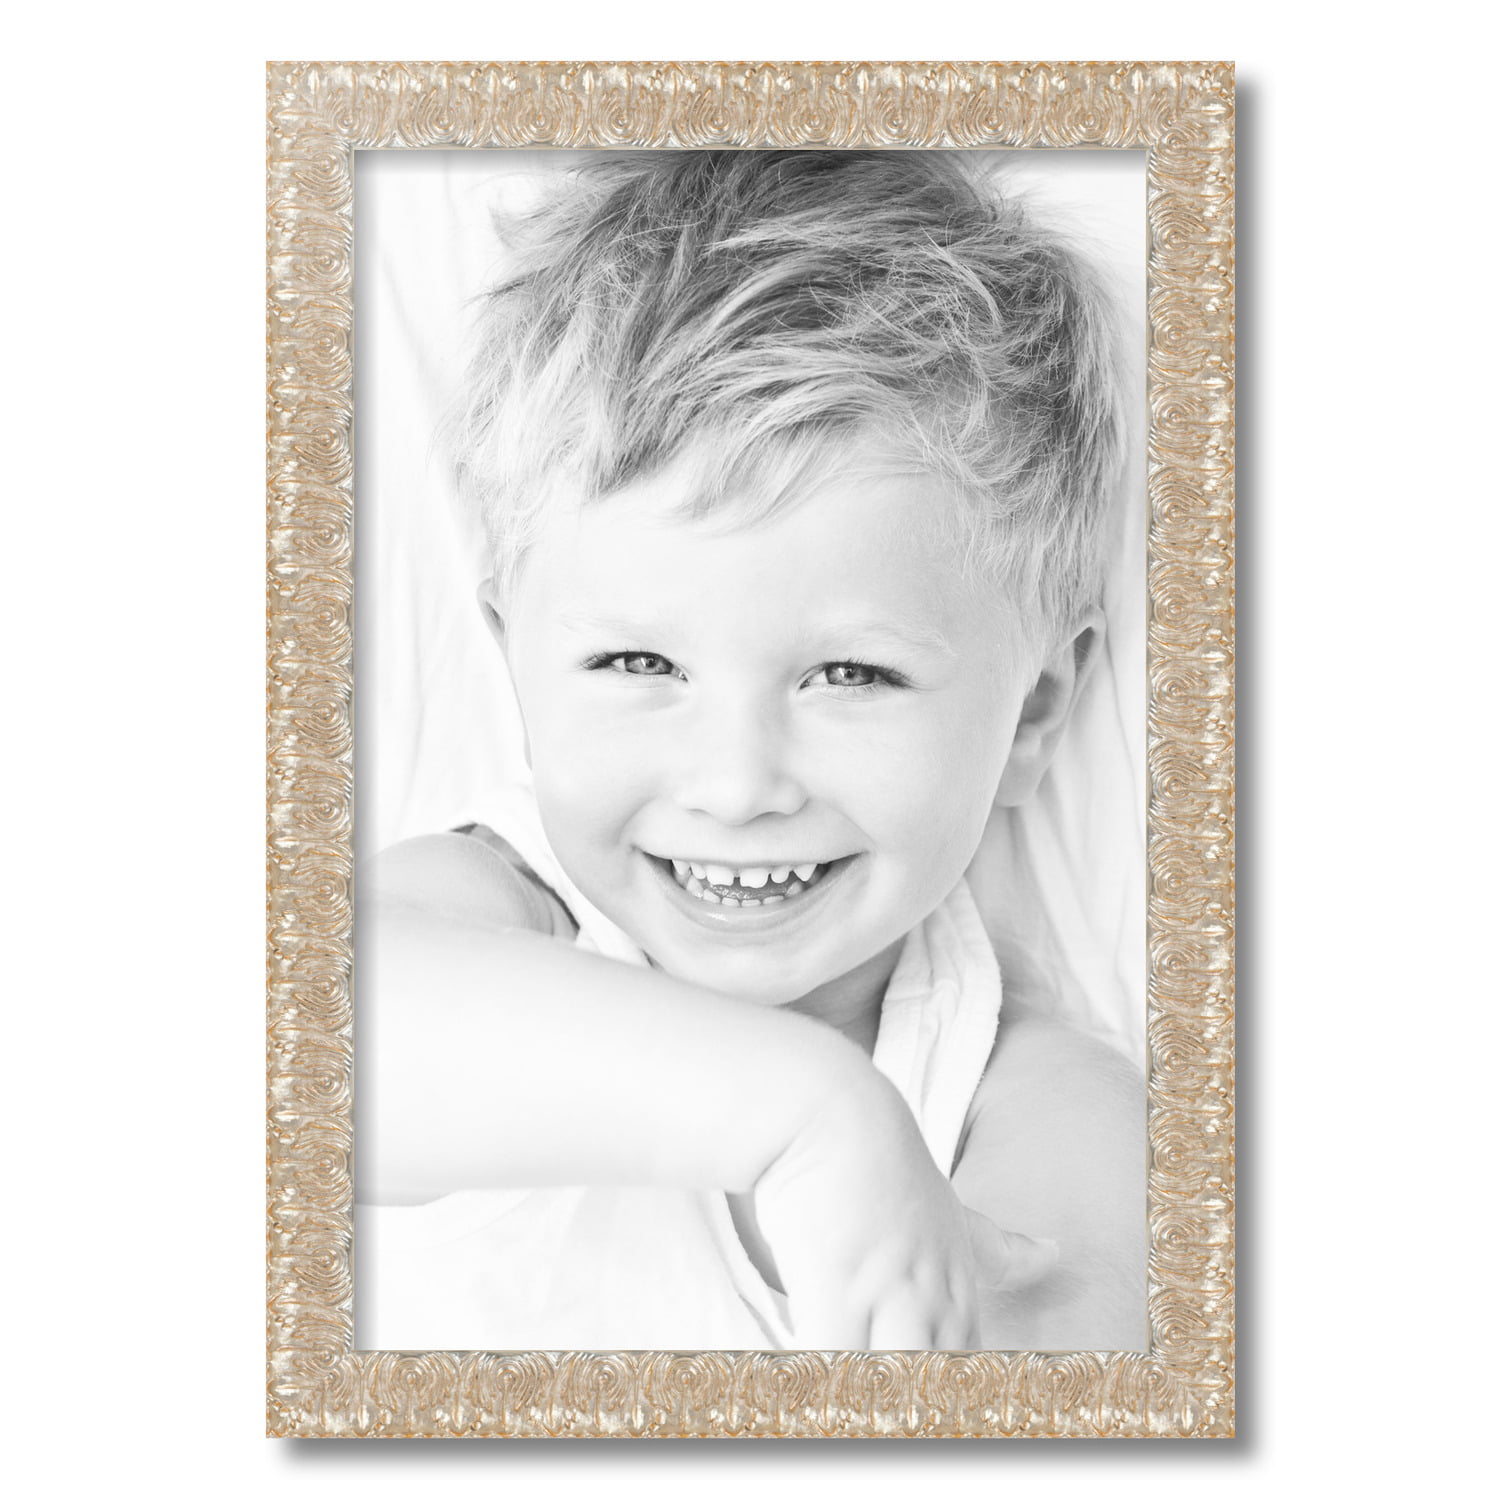 ArtToFrames 4x7 inch Gold Picture Frame, Gold Wood Poster Frame (4317), Size: 4 x 7